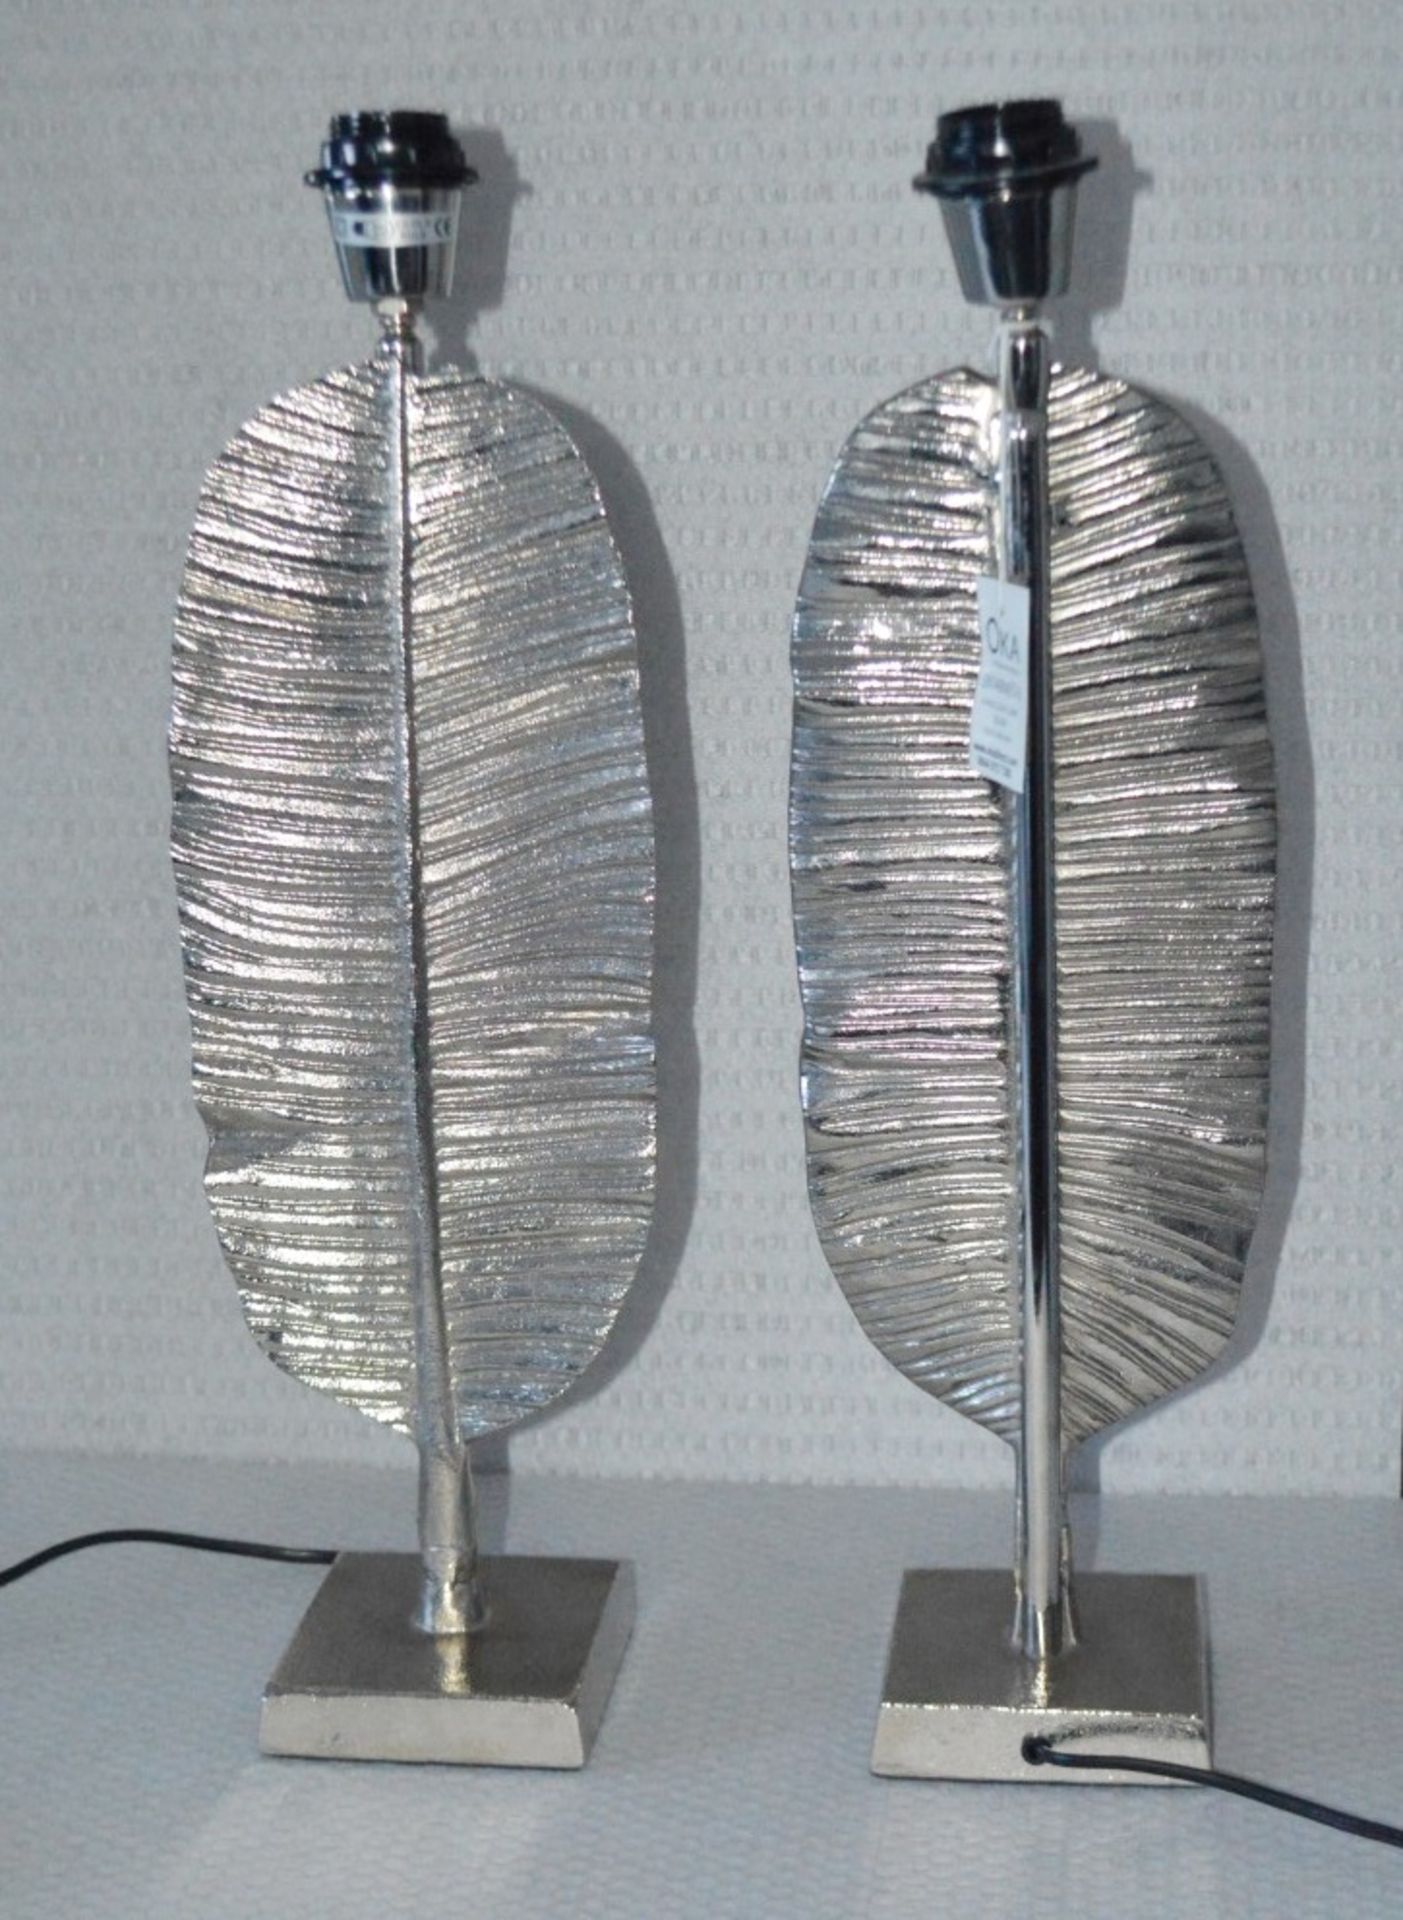 A Pair Of “Feather” Metal Bedside Lamps In A Silver Finish - From An Exclusive Property In Hale - Image 5 of 5